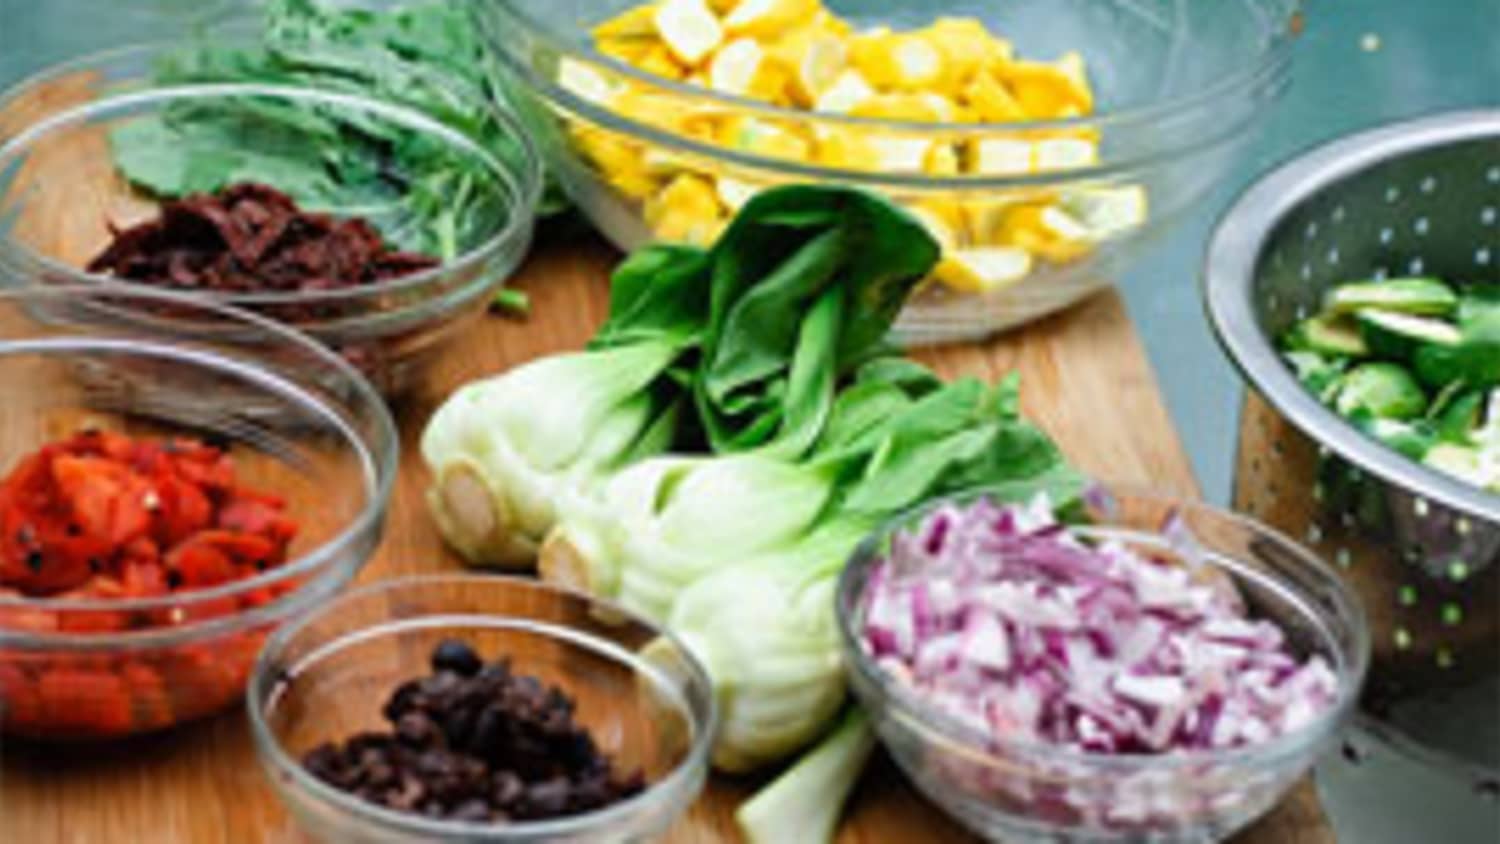 cook out of the box: Hands On - Mise en Place